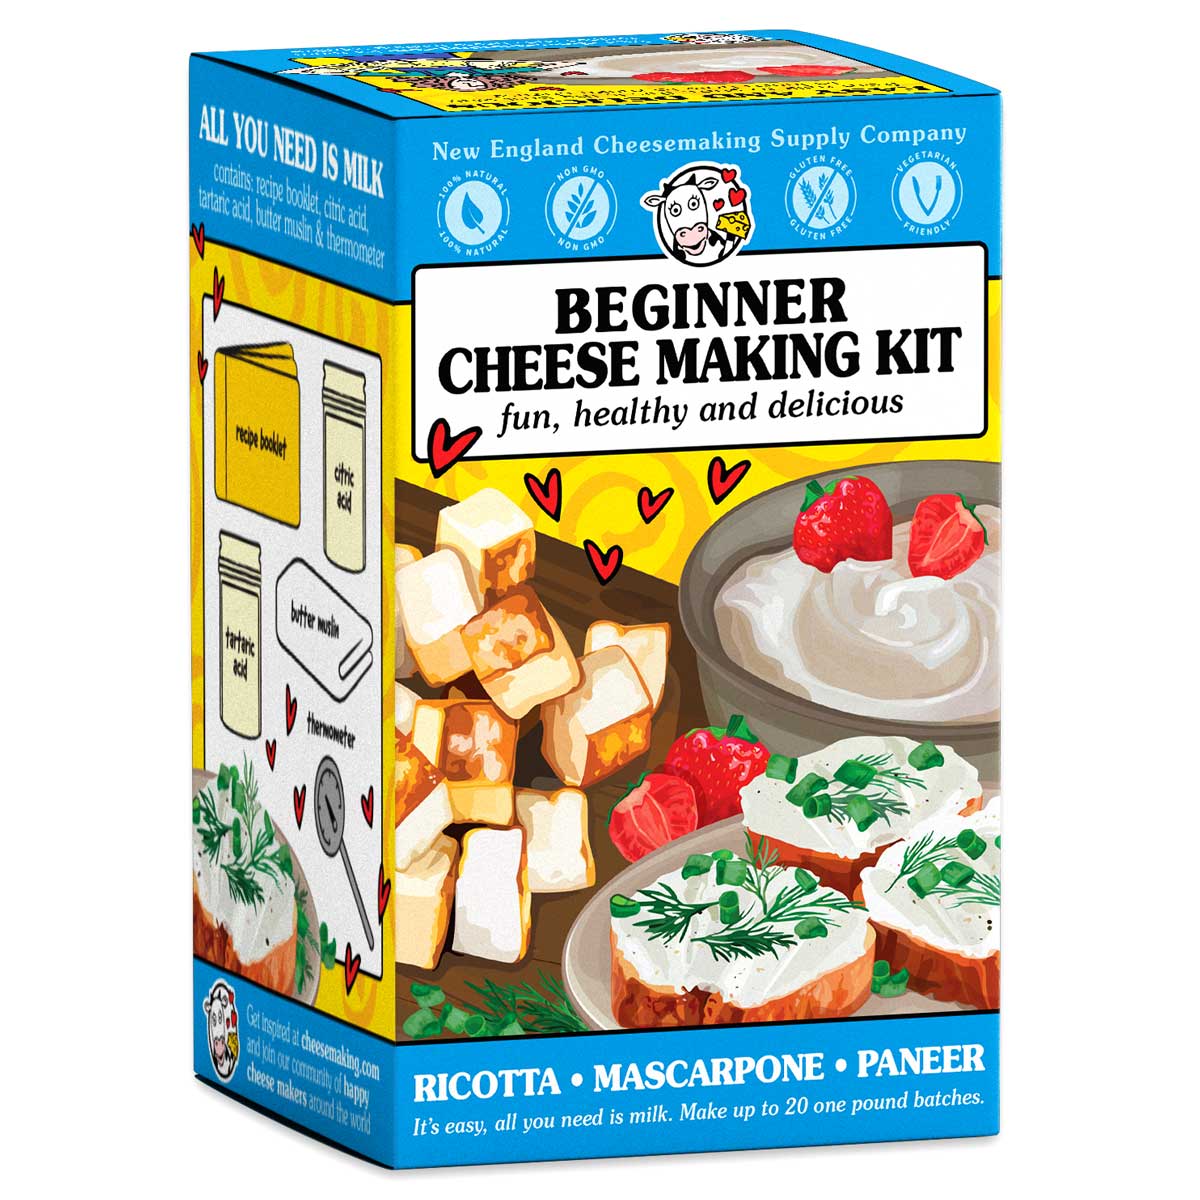 The Cheesemaker, Cheese Making Supplies